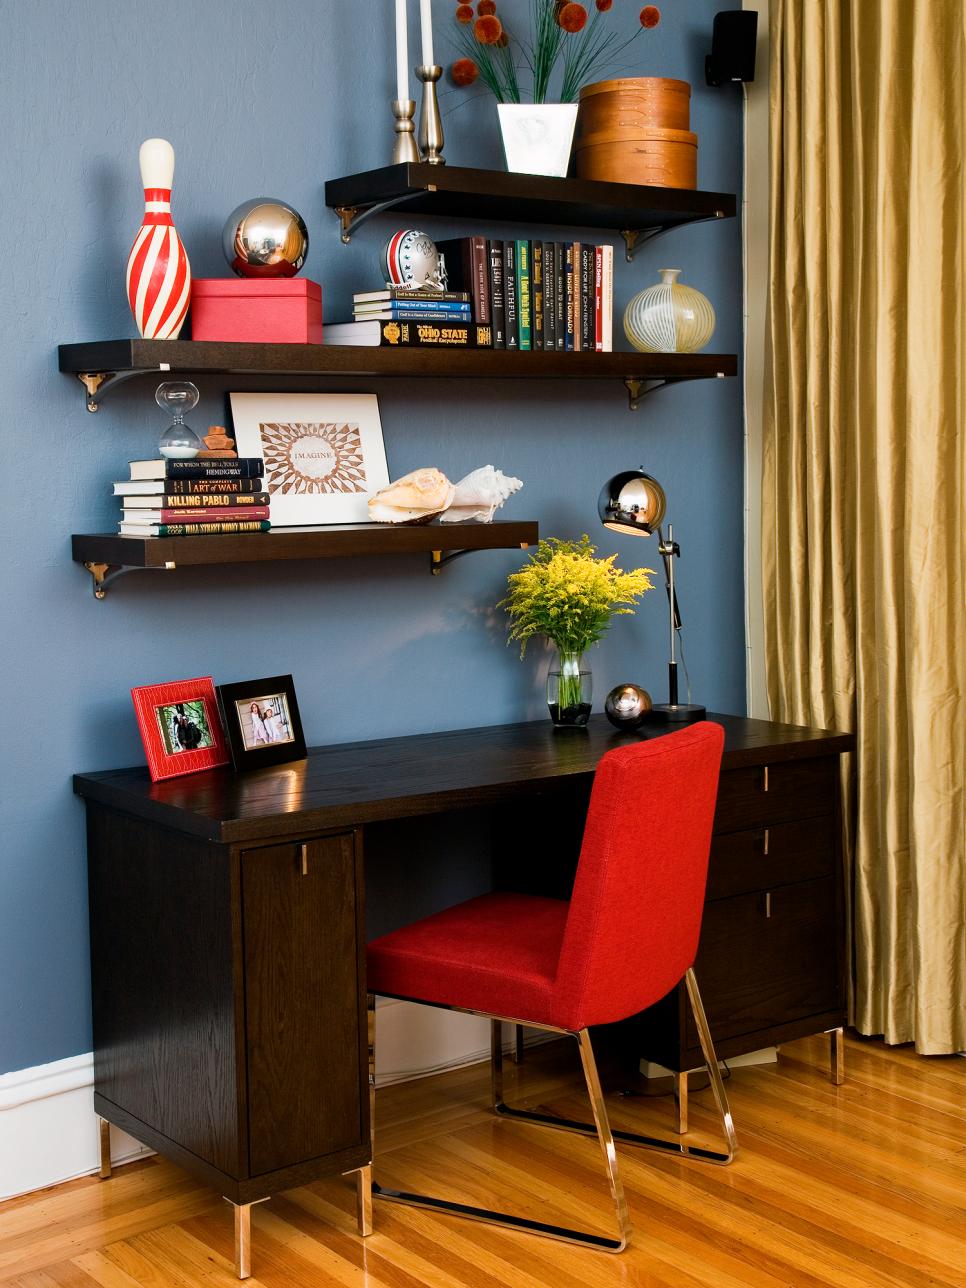 Contemporary Home Office With Floating Shelves and Red Chair